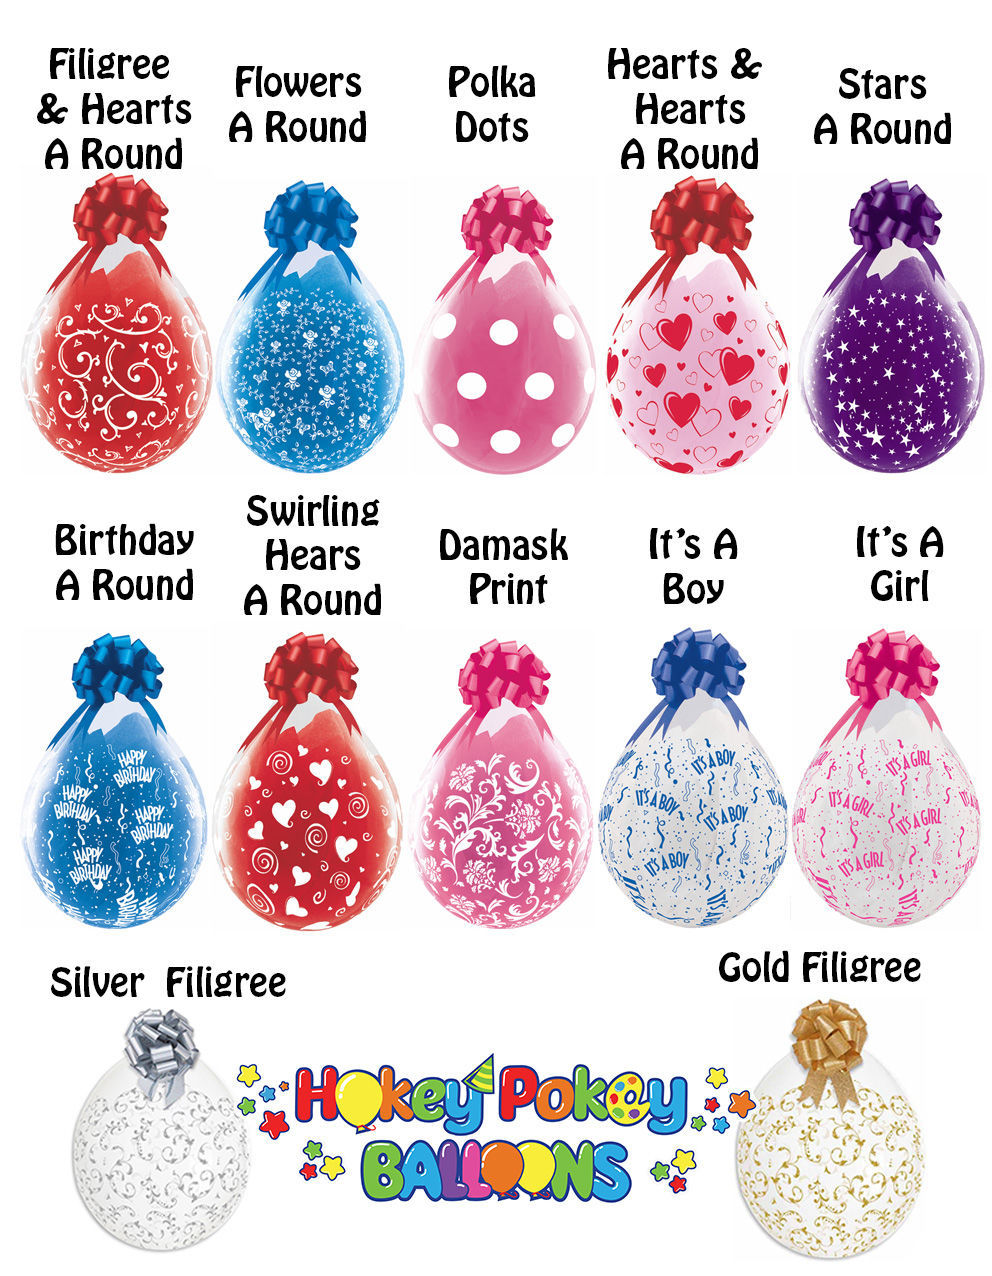 Picture of Birthday Elegant - Bring Your Own Gift - Stuffed Balloon with Foil Topper